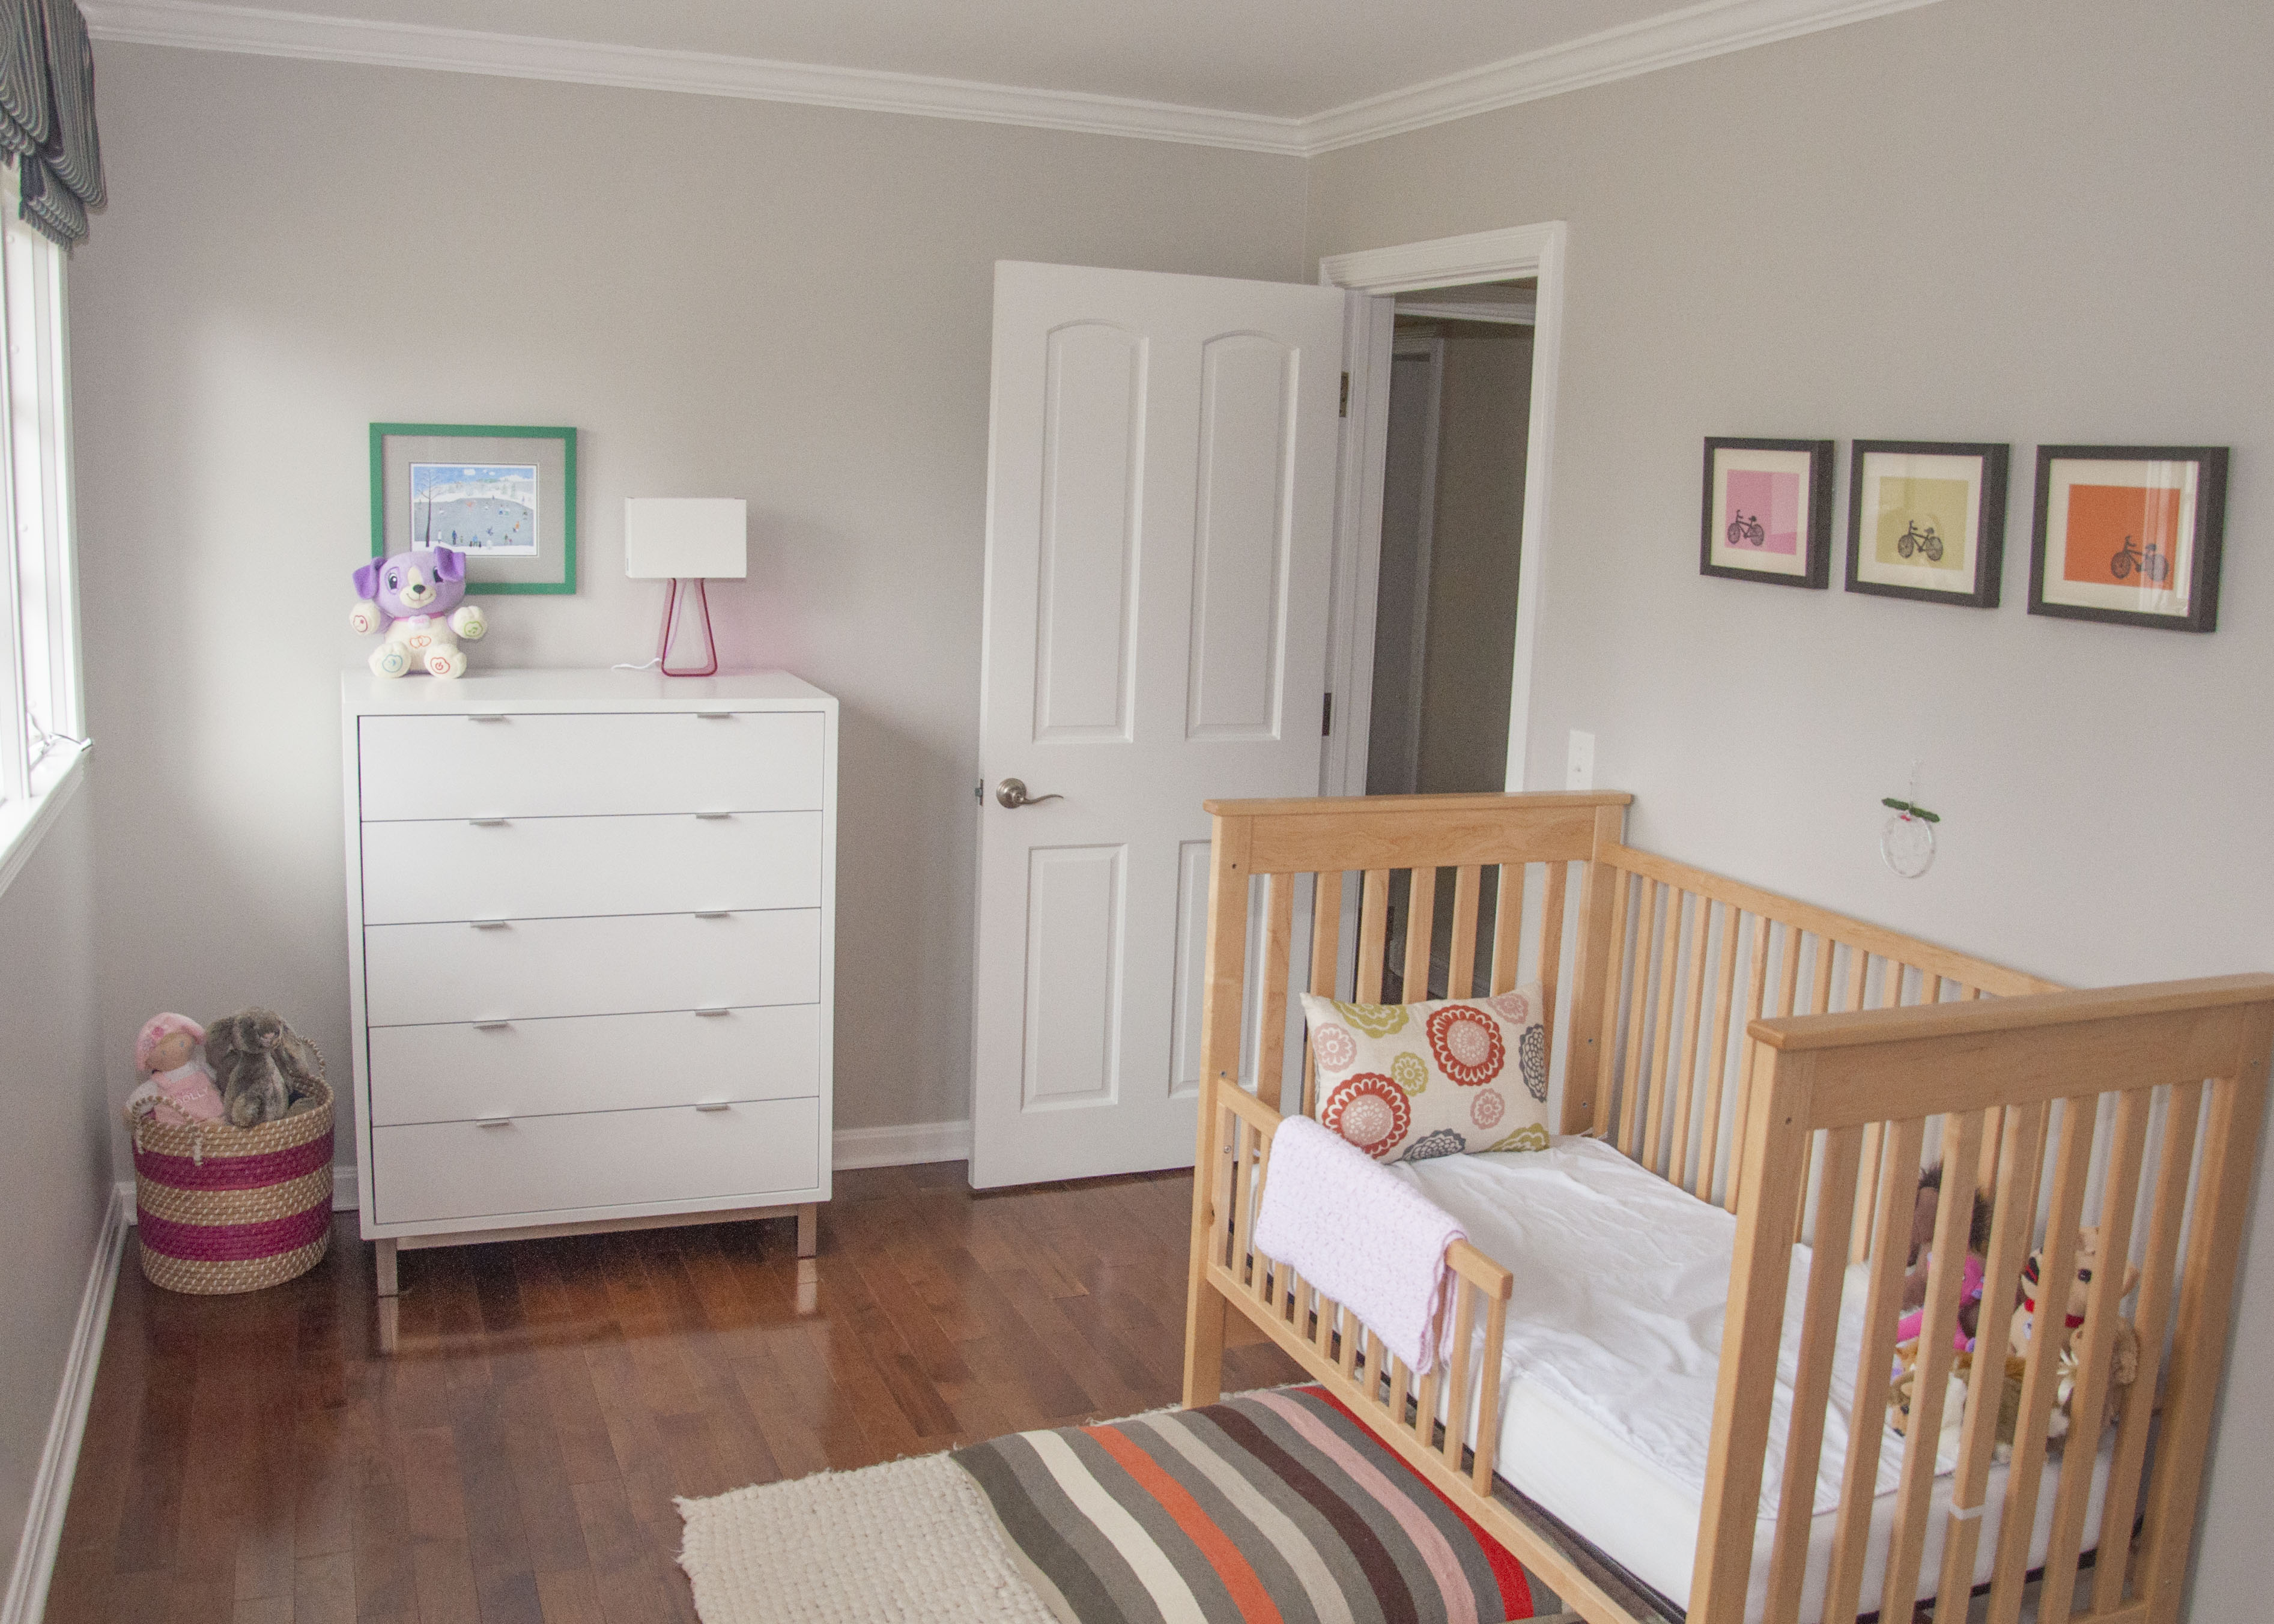 Kids' nursery or toddler room with Nest crib and Delano dresser